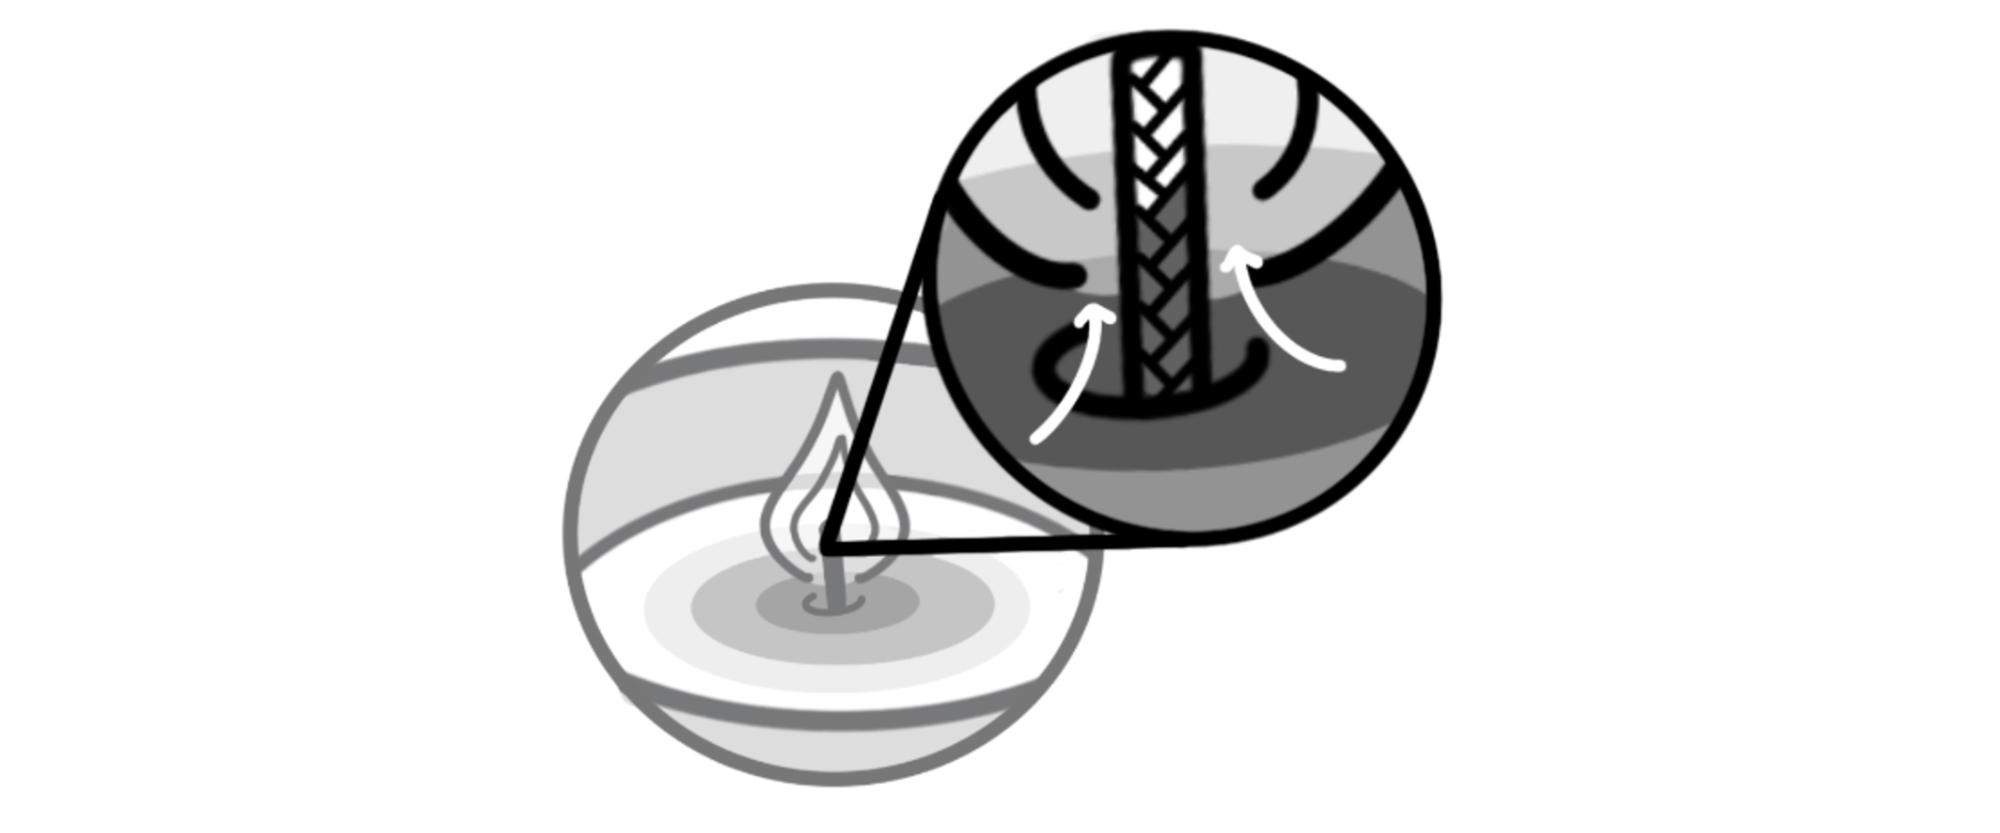 Hand-drawn digital illustration of a burning candle with a zoomed in view of wax being drawn up the wick via capillary action